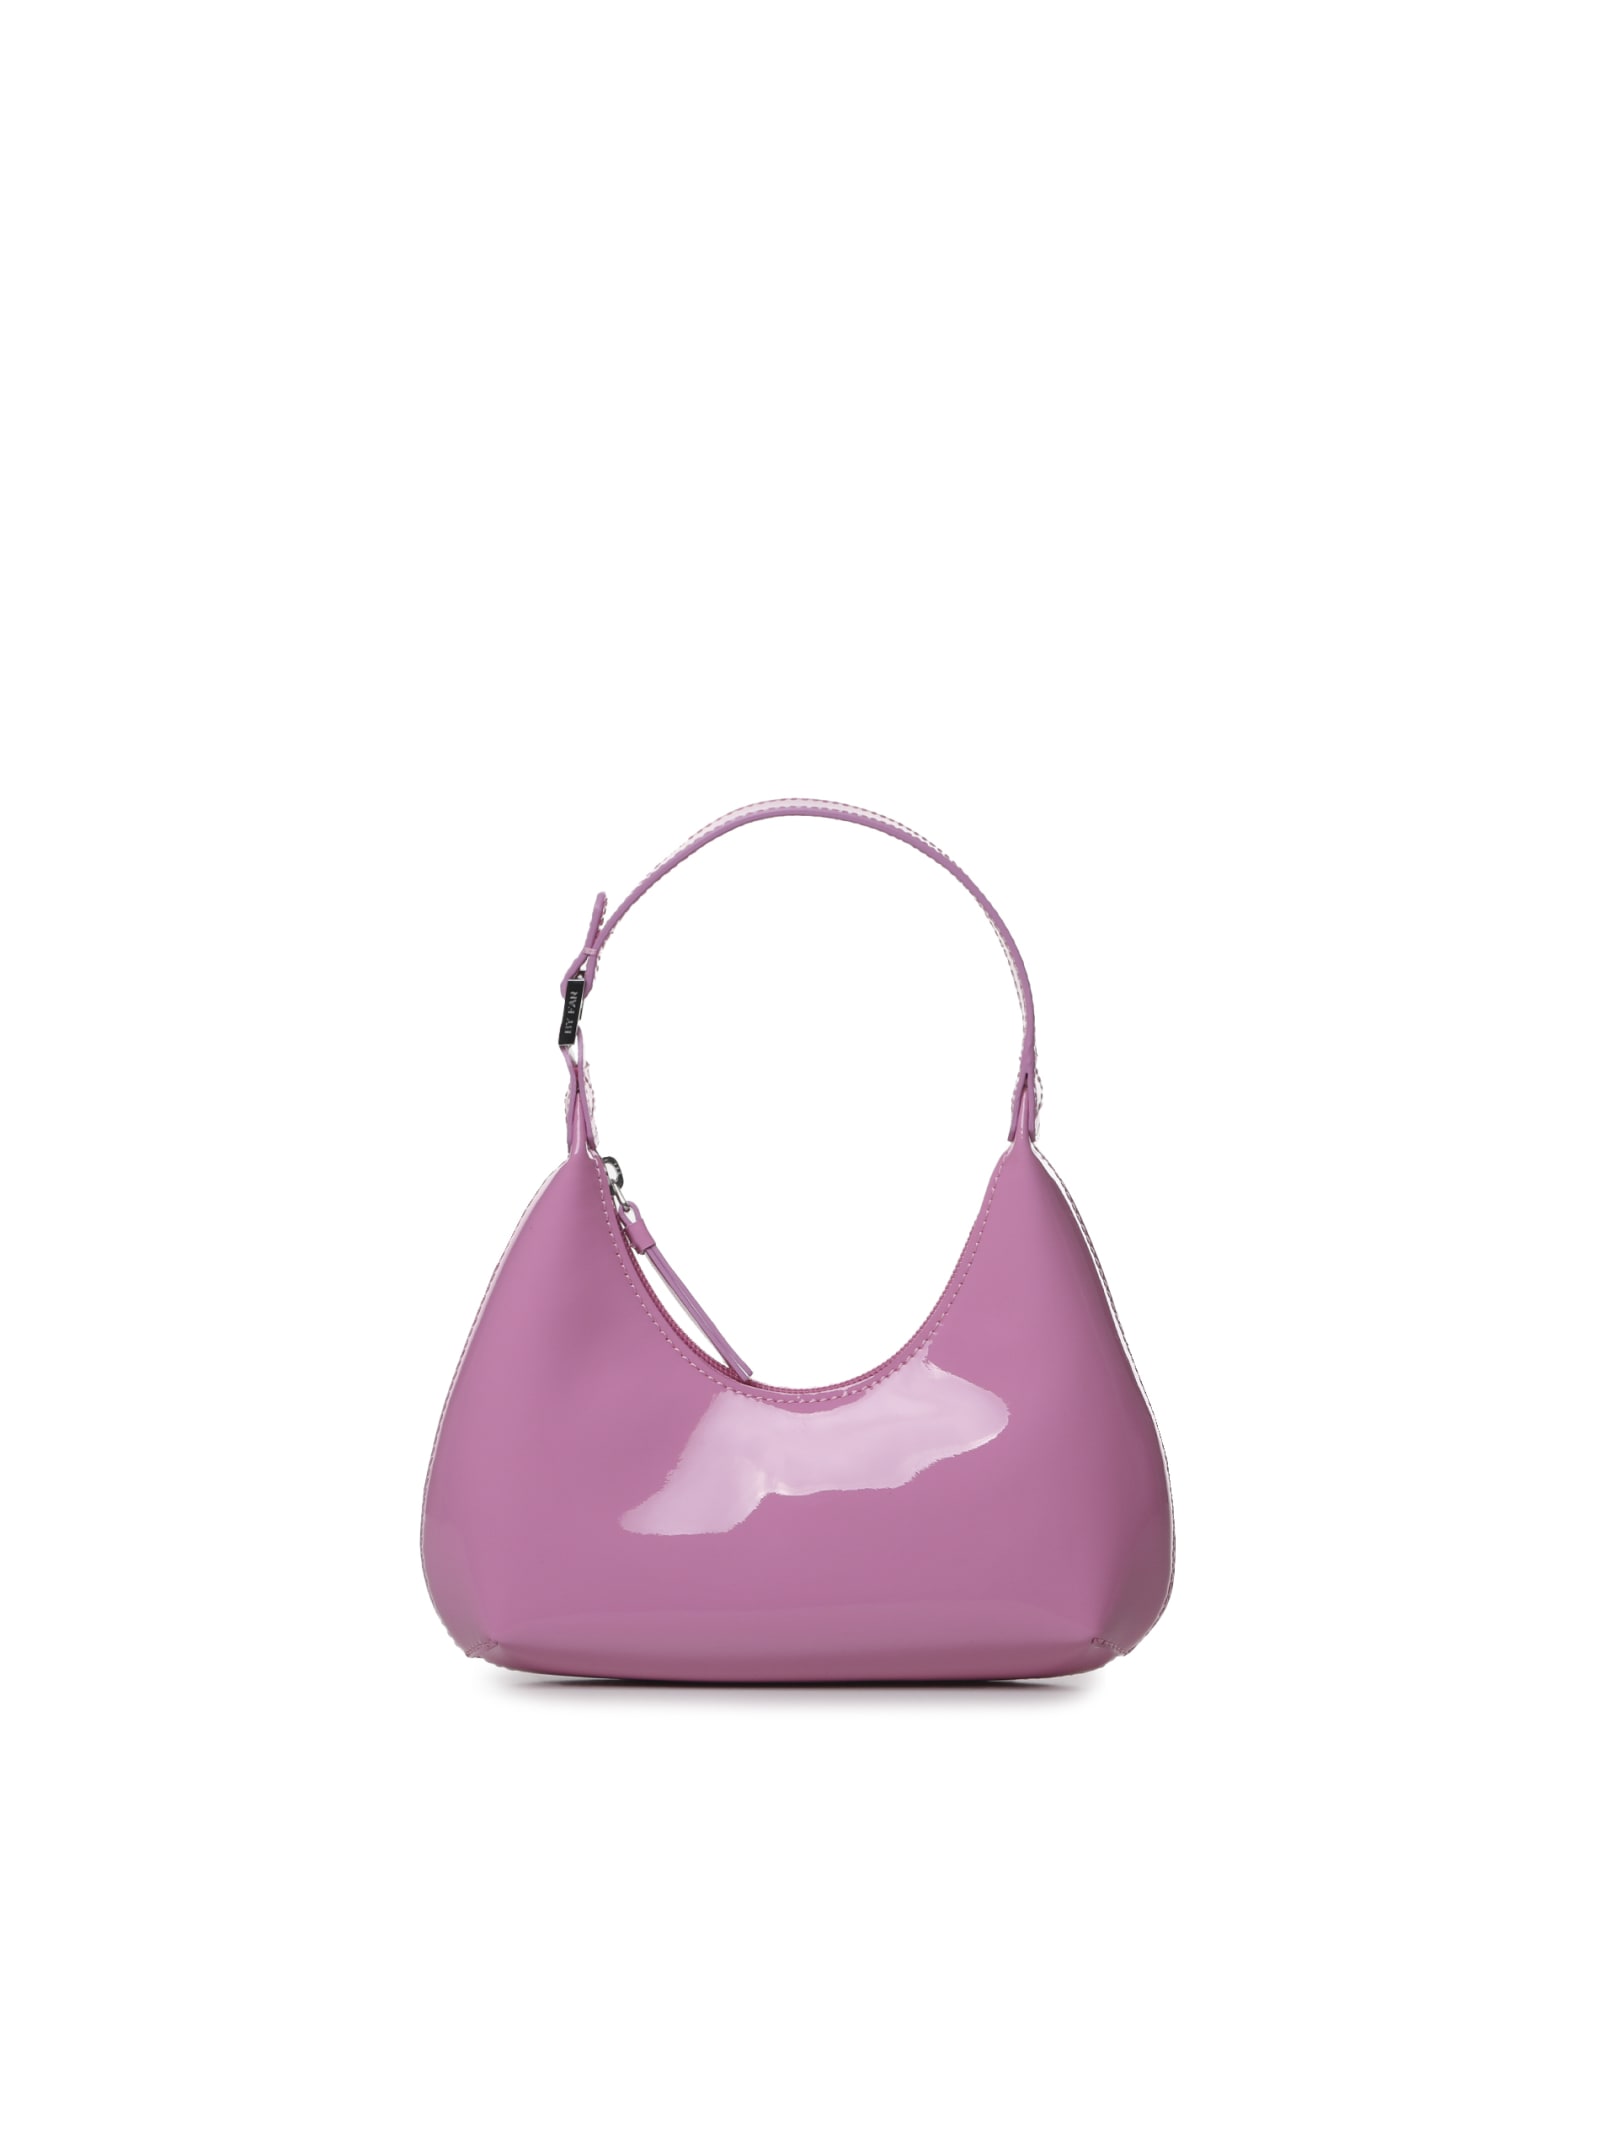 BY FAR Baby Ambe Patent Leather Shoulder Bag